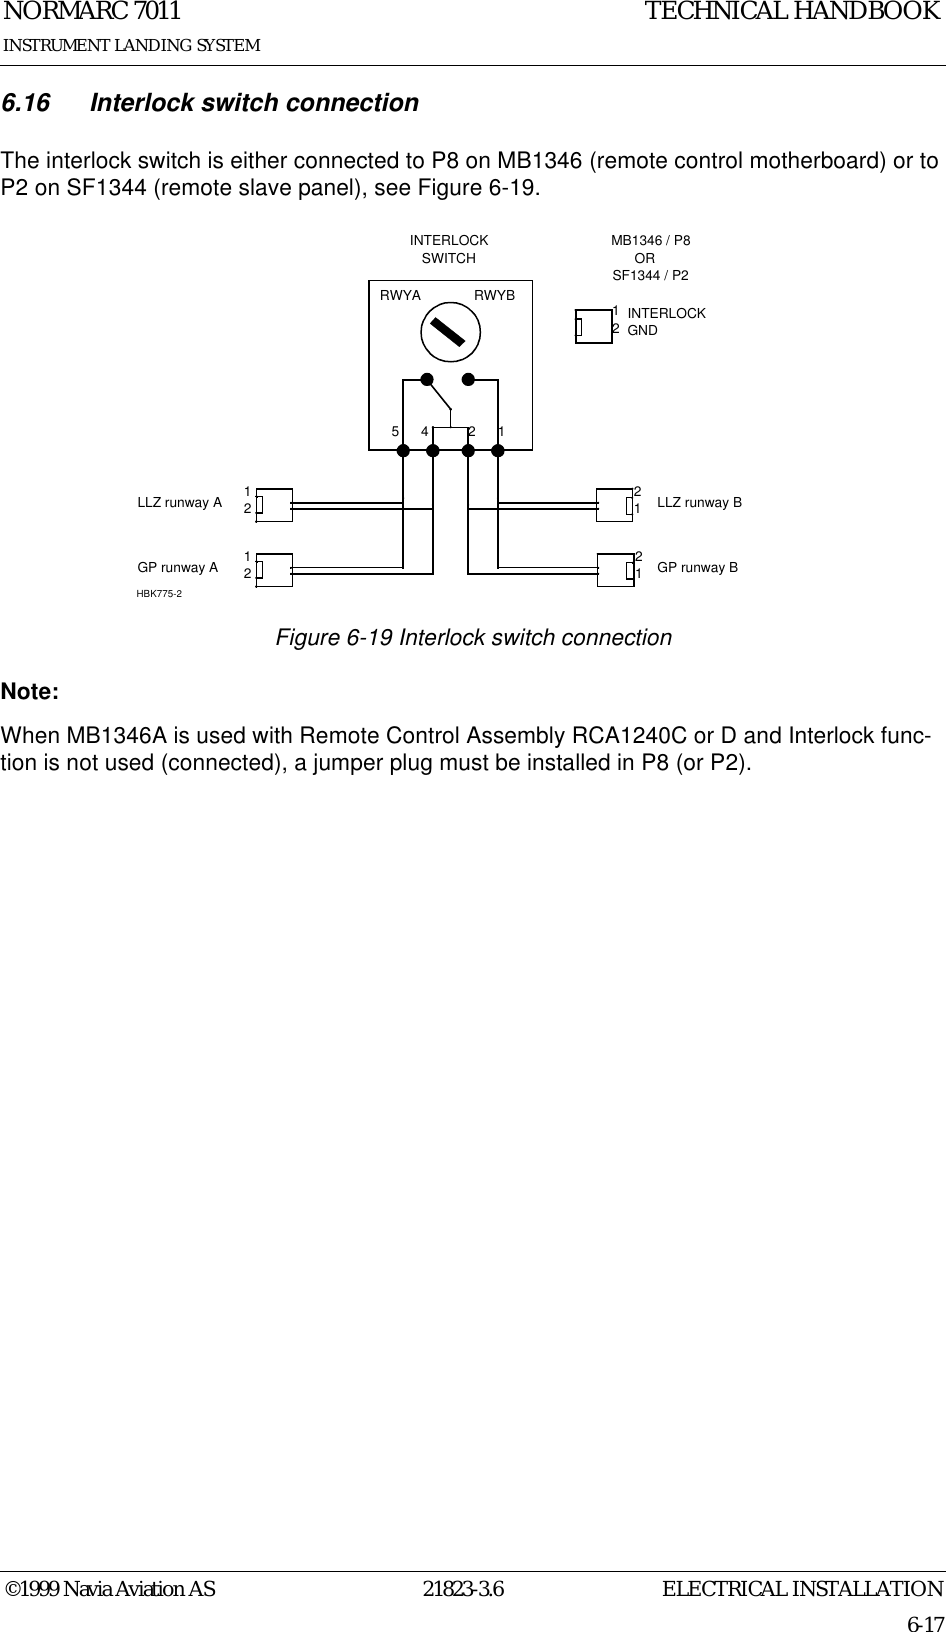 ELECTRICAL INSTALLATIONNORMARC 701121823-3.66-17©1999 Navia Aviation ASINSTRUMENT LANDING SYSTEMTECHNICAL HANDBOOK6.16 Interlock switch connectionThe interlock switch is either connected to P8 on MB1346 (remote control motherboard) or to P2 on SF1344 (remote slave panel), see Figure 6-19.Figure 6-19 Interlock switch connectionNote:When MB1346A is used with Remote Control Assembly RCA1240C or D and Interlock func-tion is not used (connected), a jumper plug must be installed in P8 (or P2).21MB1346 / P8ORSF1344 / P2INTERLOCK SWITCHRWYA RWYB211212INTERLOCKGND1254 21LLZ runway AGP runway ALLZ runway BGP runway BHBK775-2